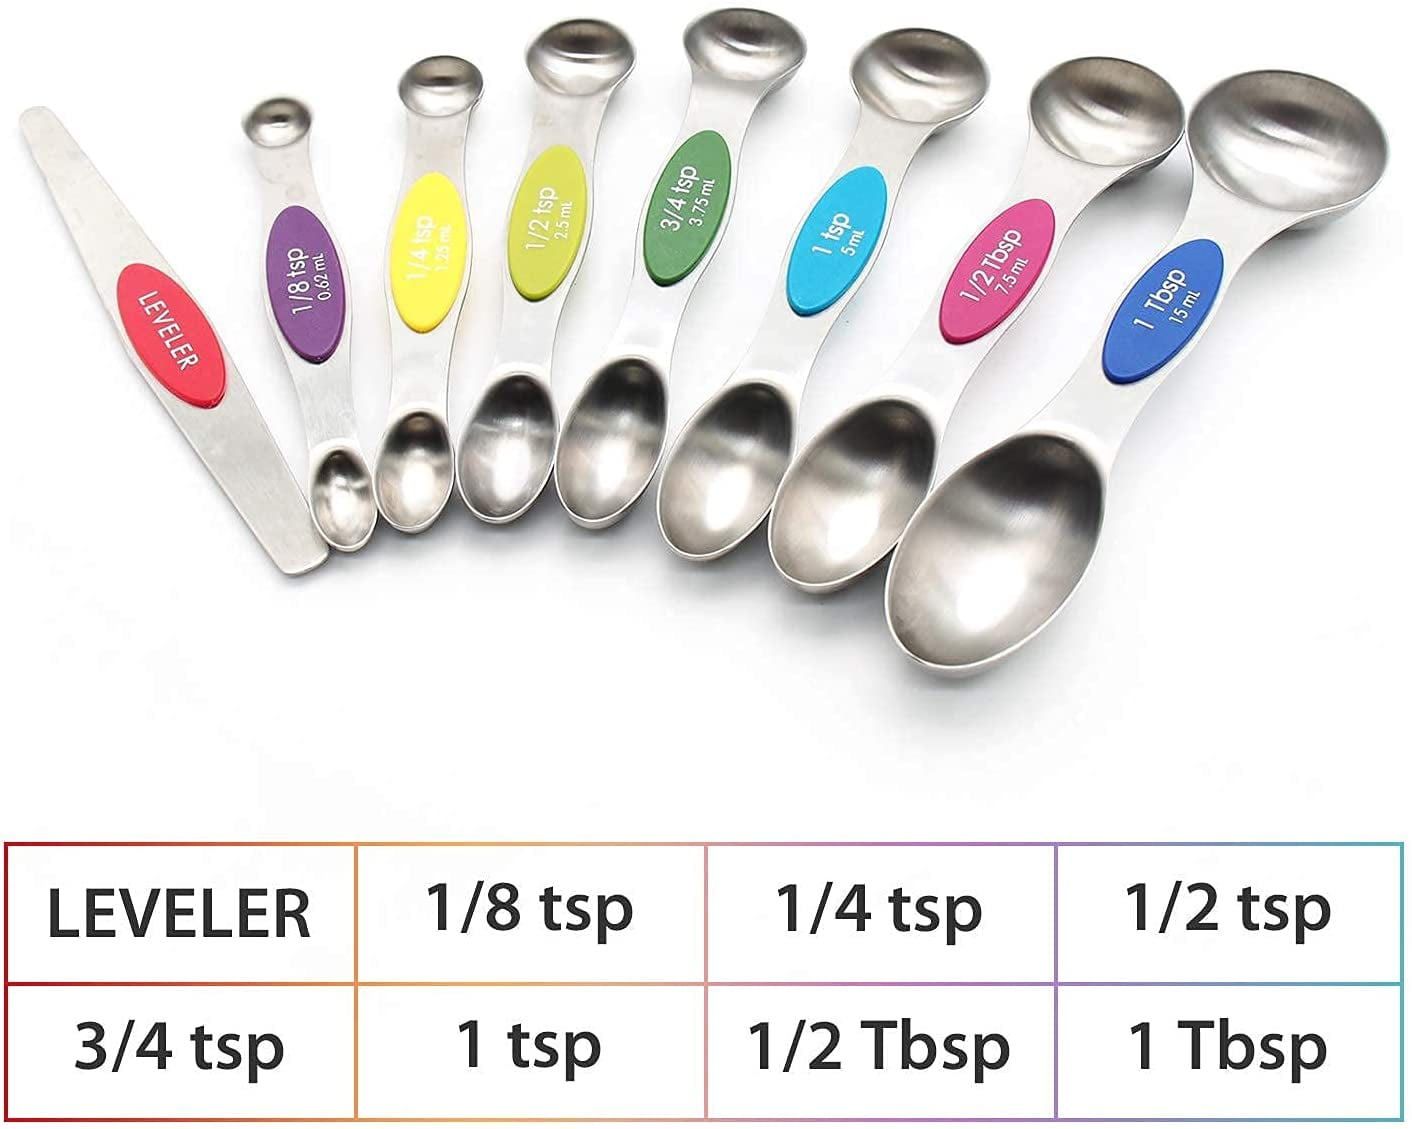 Met Lux 8-Piece Measuring Spoon Set, 1 Premium Magnetic Measuring Spoon Set - Dual-Sided, with Leveler, Multicolor Stainless Steel Spoon Set, with U.S